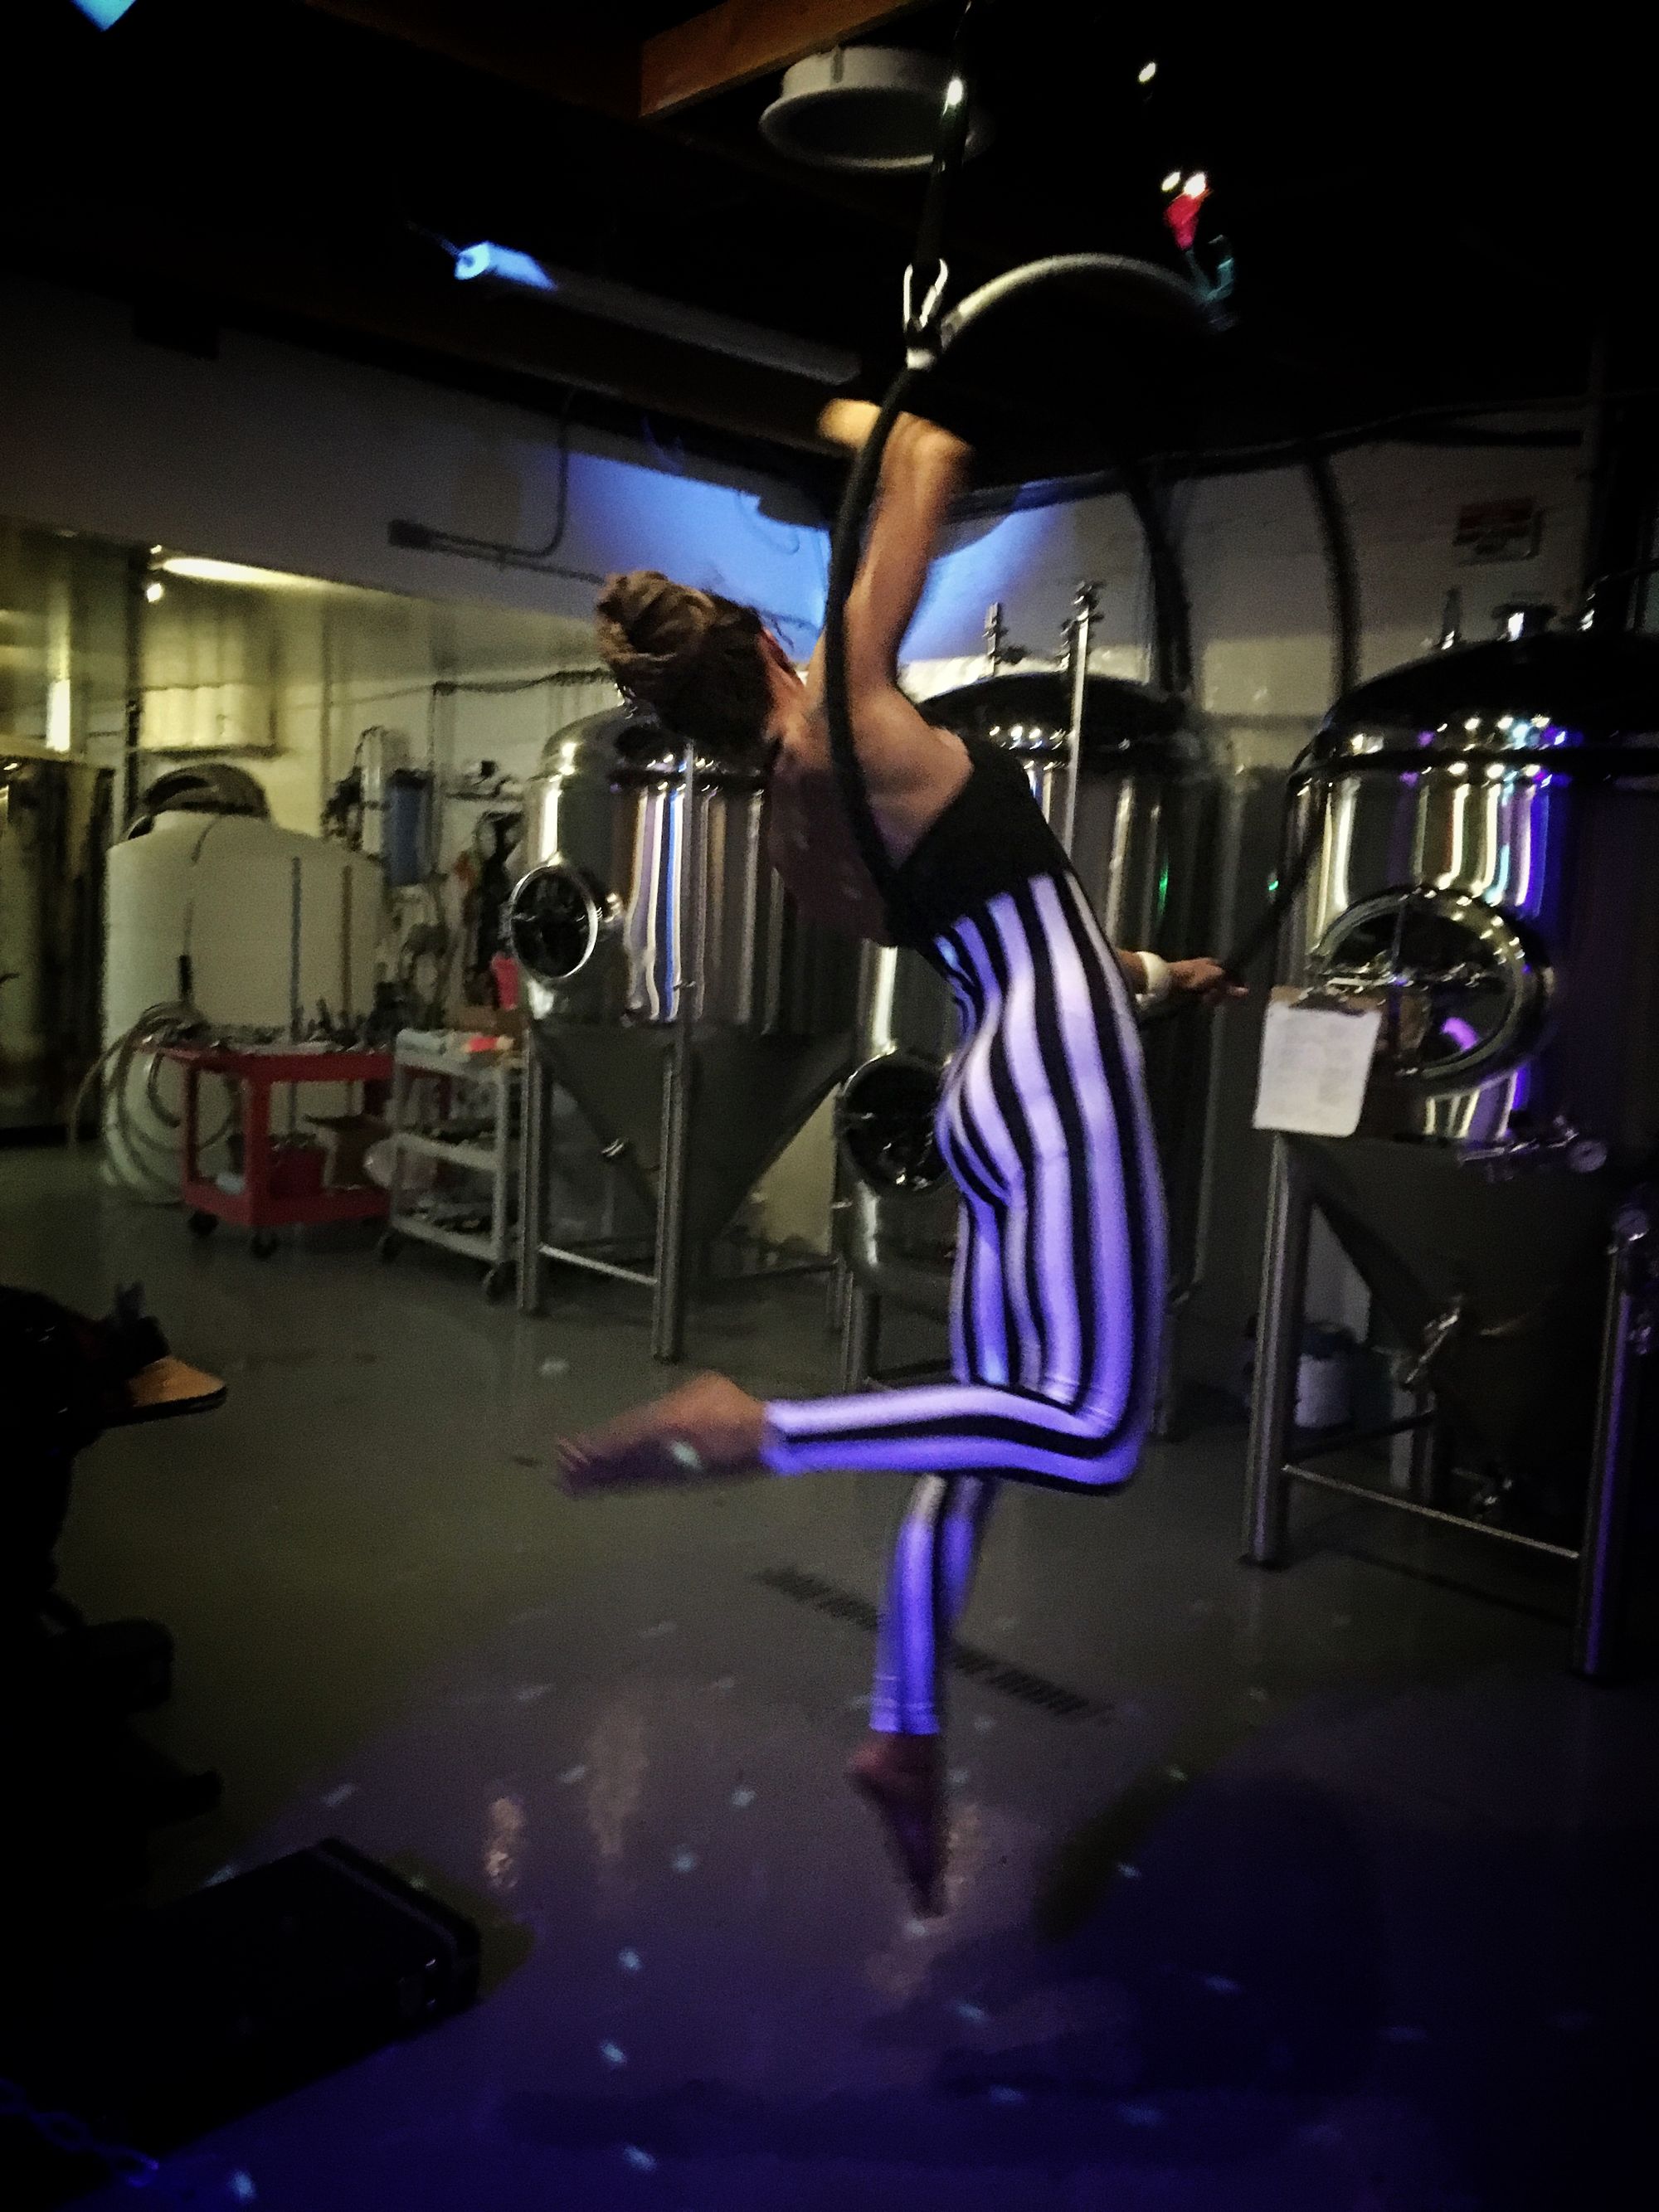 Woman performing on aerial hoop wearing black and white striped costume, next to steel tanks in a brewery